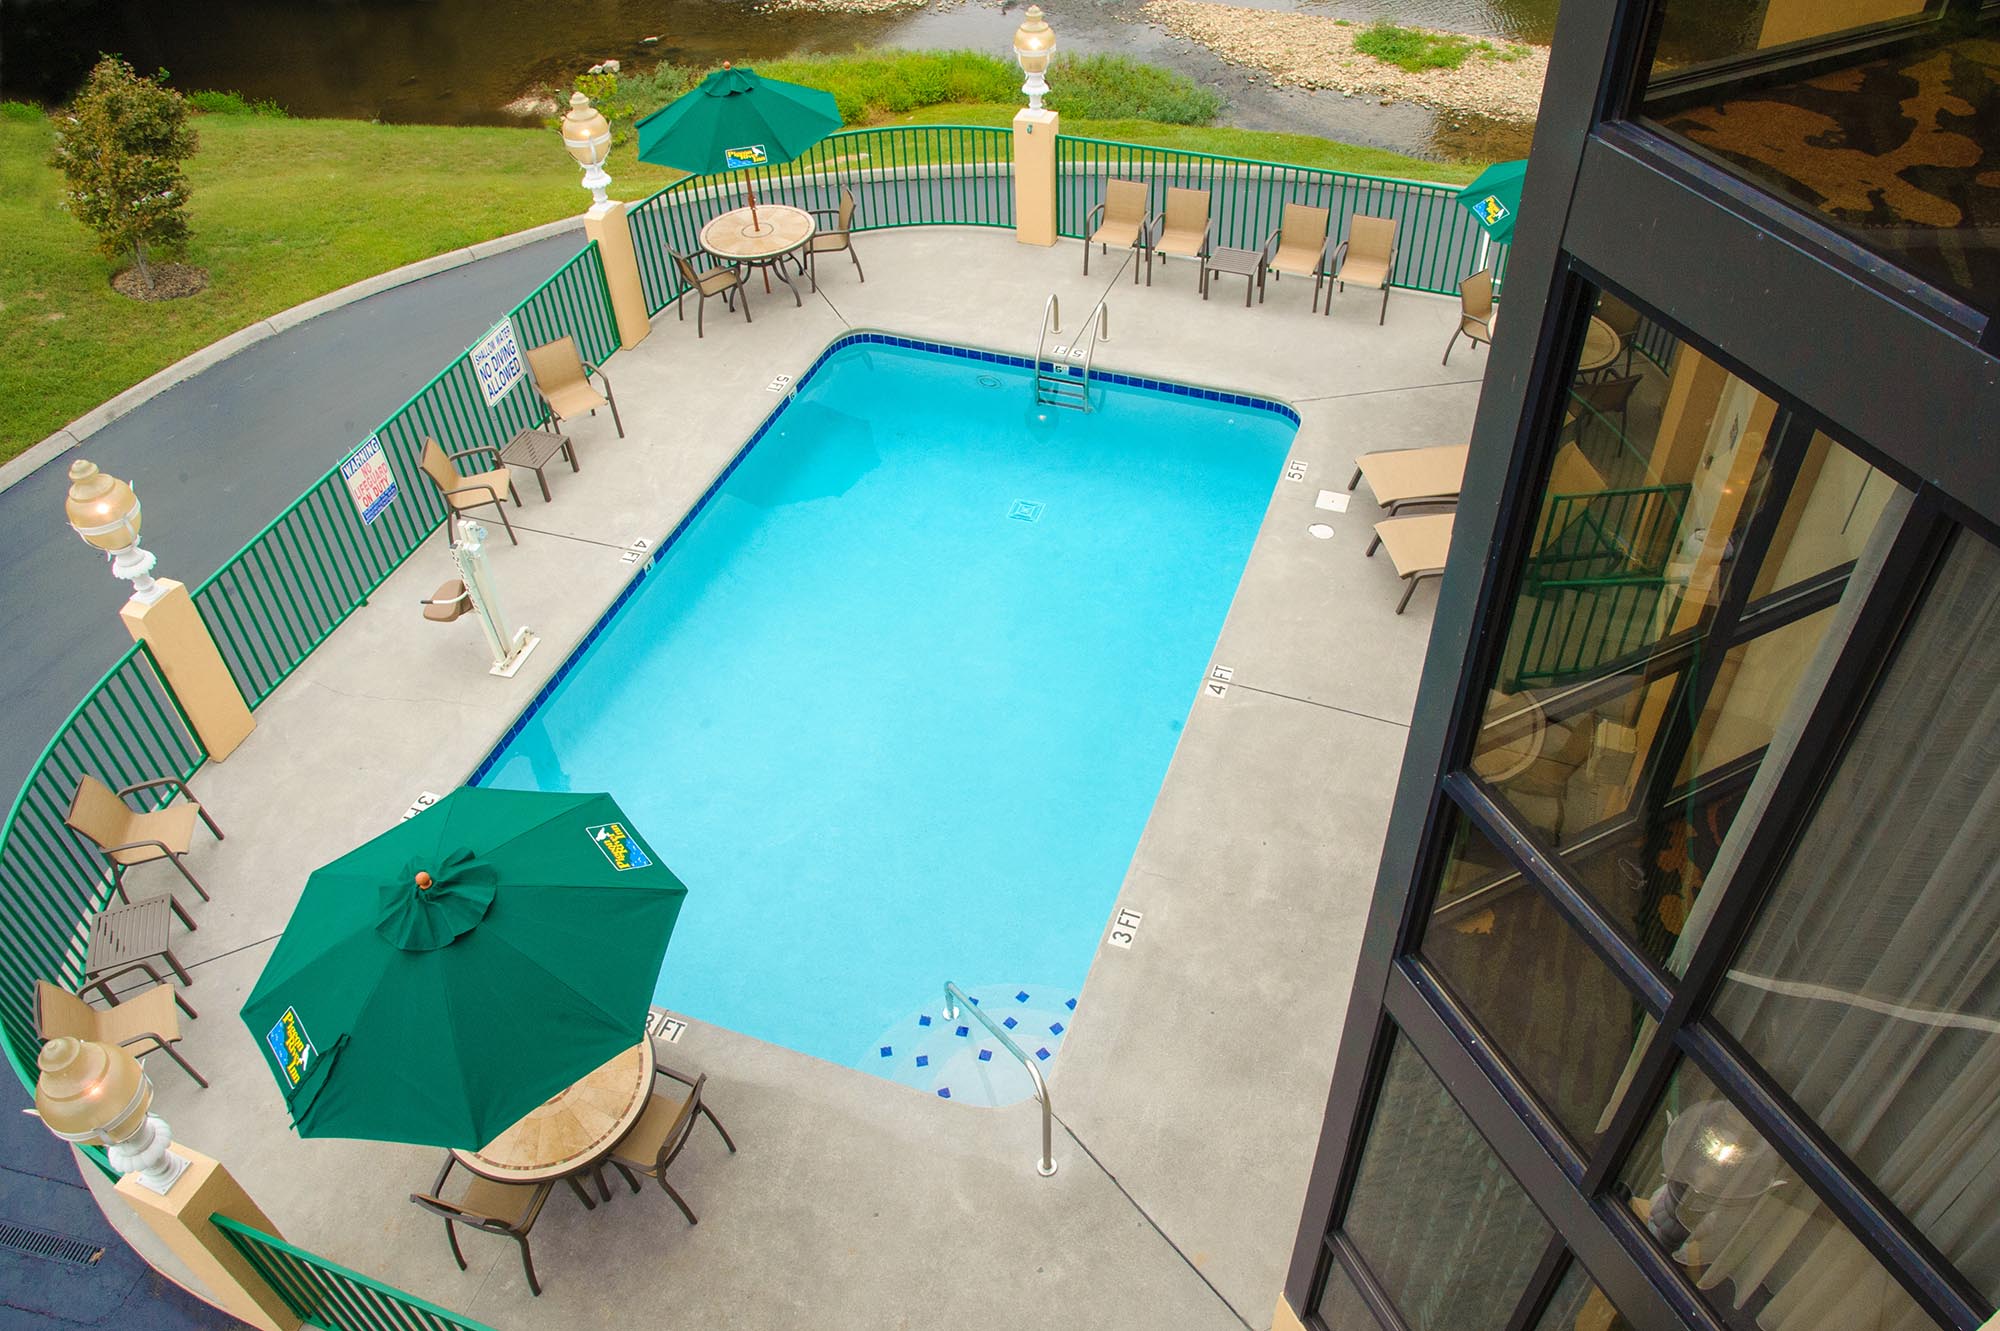 Pool from guests view in hotel room up high